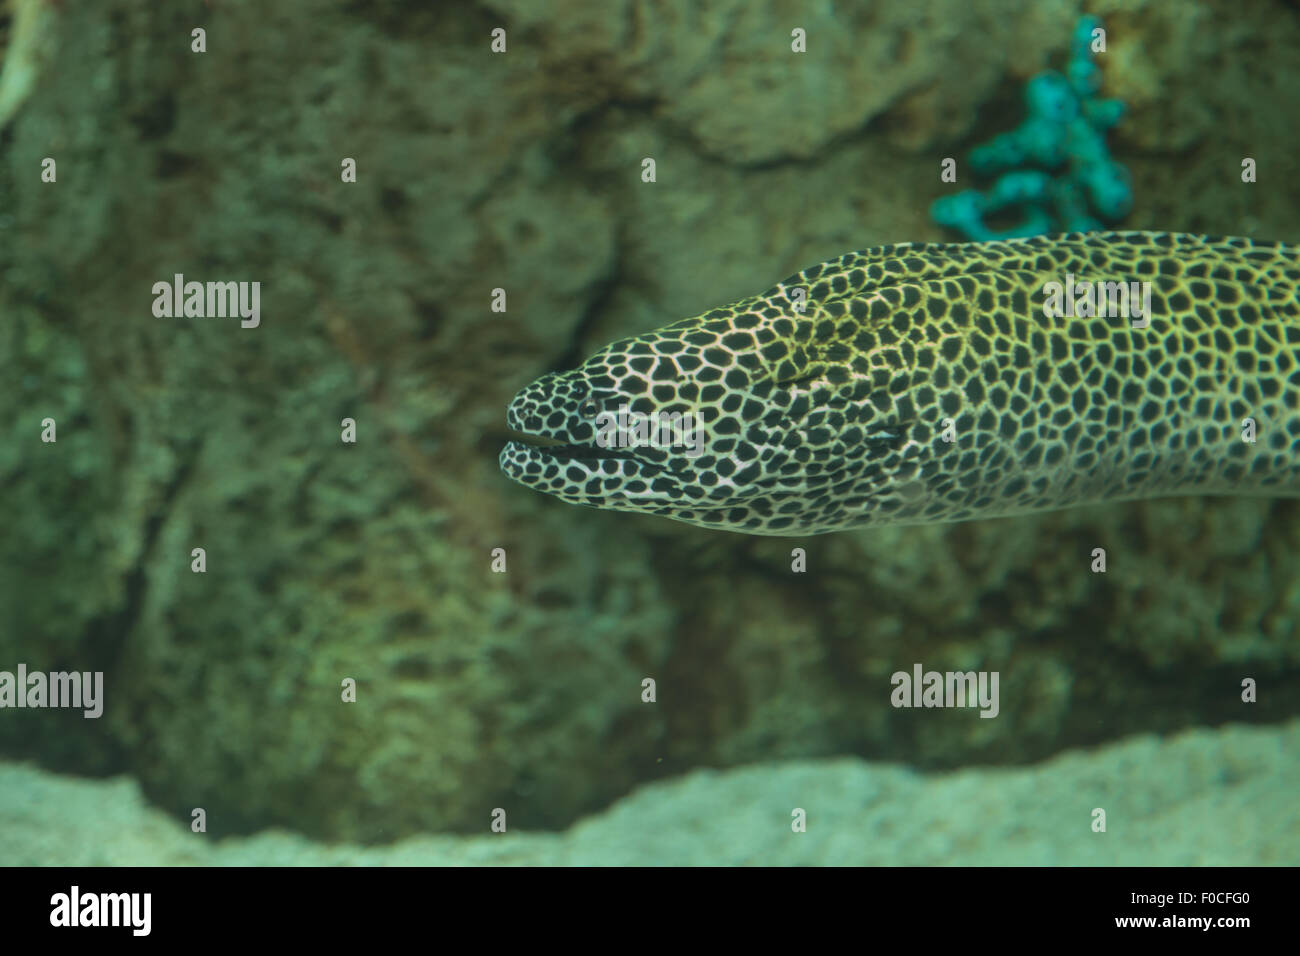 Leopard moray eel, Enchelycore pardalis, has spotted skin Stock Photo